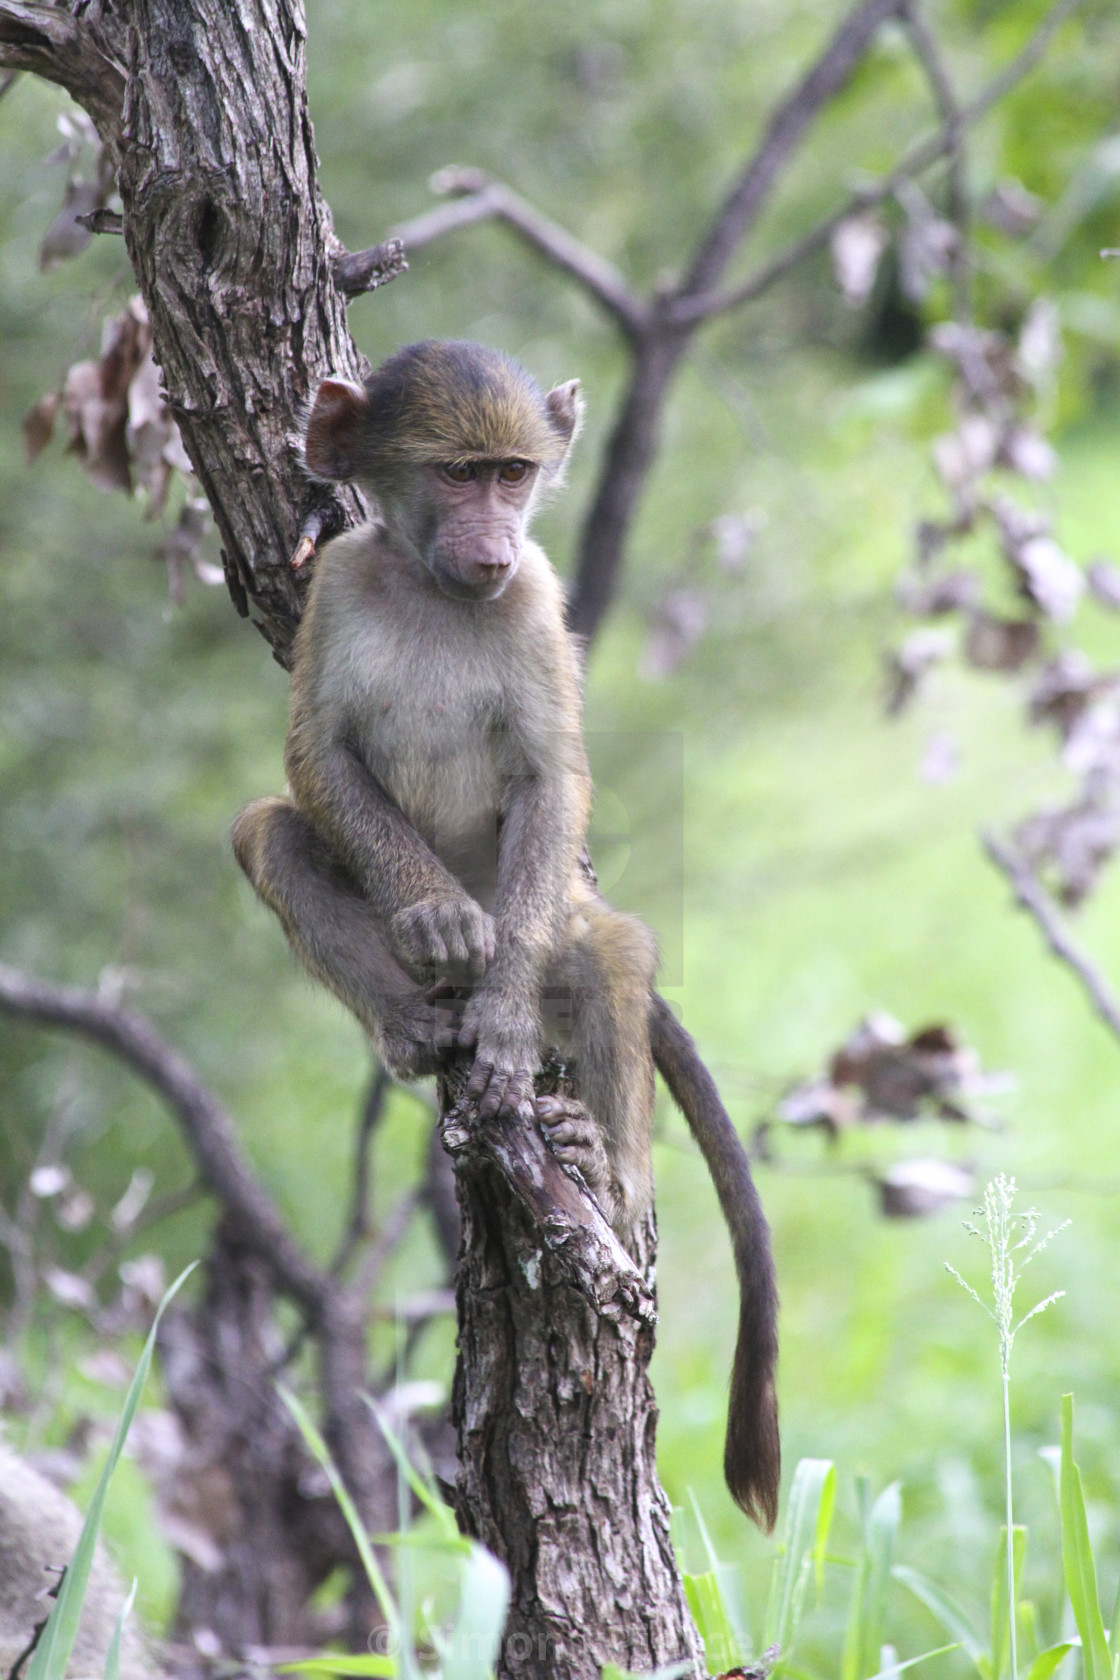 "Cute baby baboon sitting in a tree, Kruger National Park, South Africa" stock image